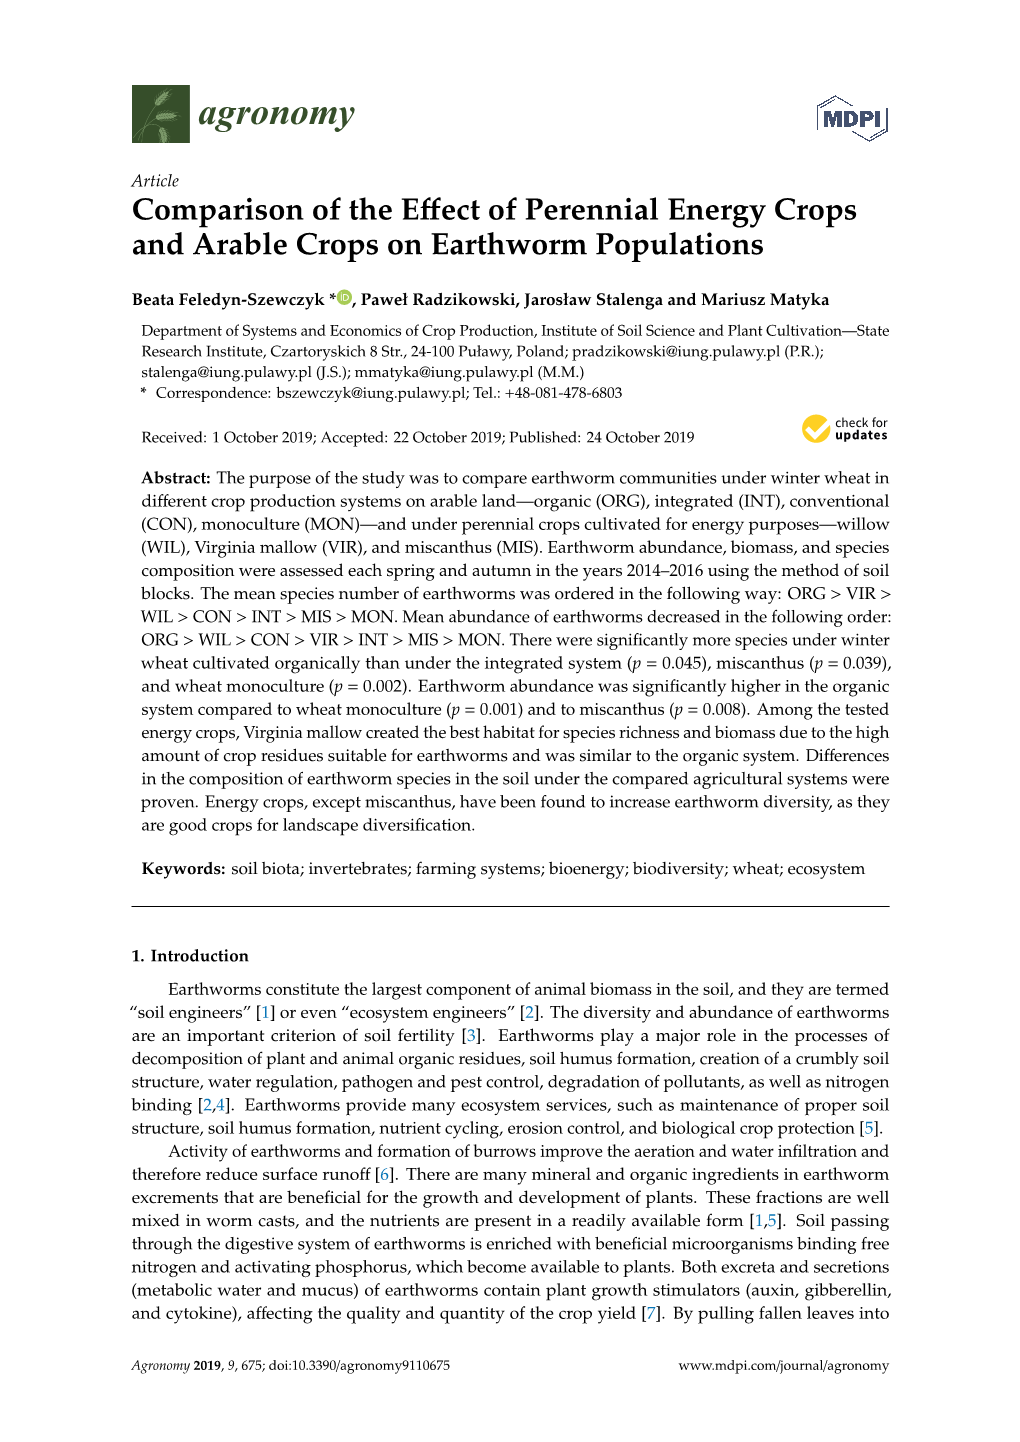 Comparison of the Effect of Perennial Energy Crops and Arable Crops On